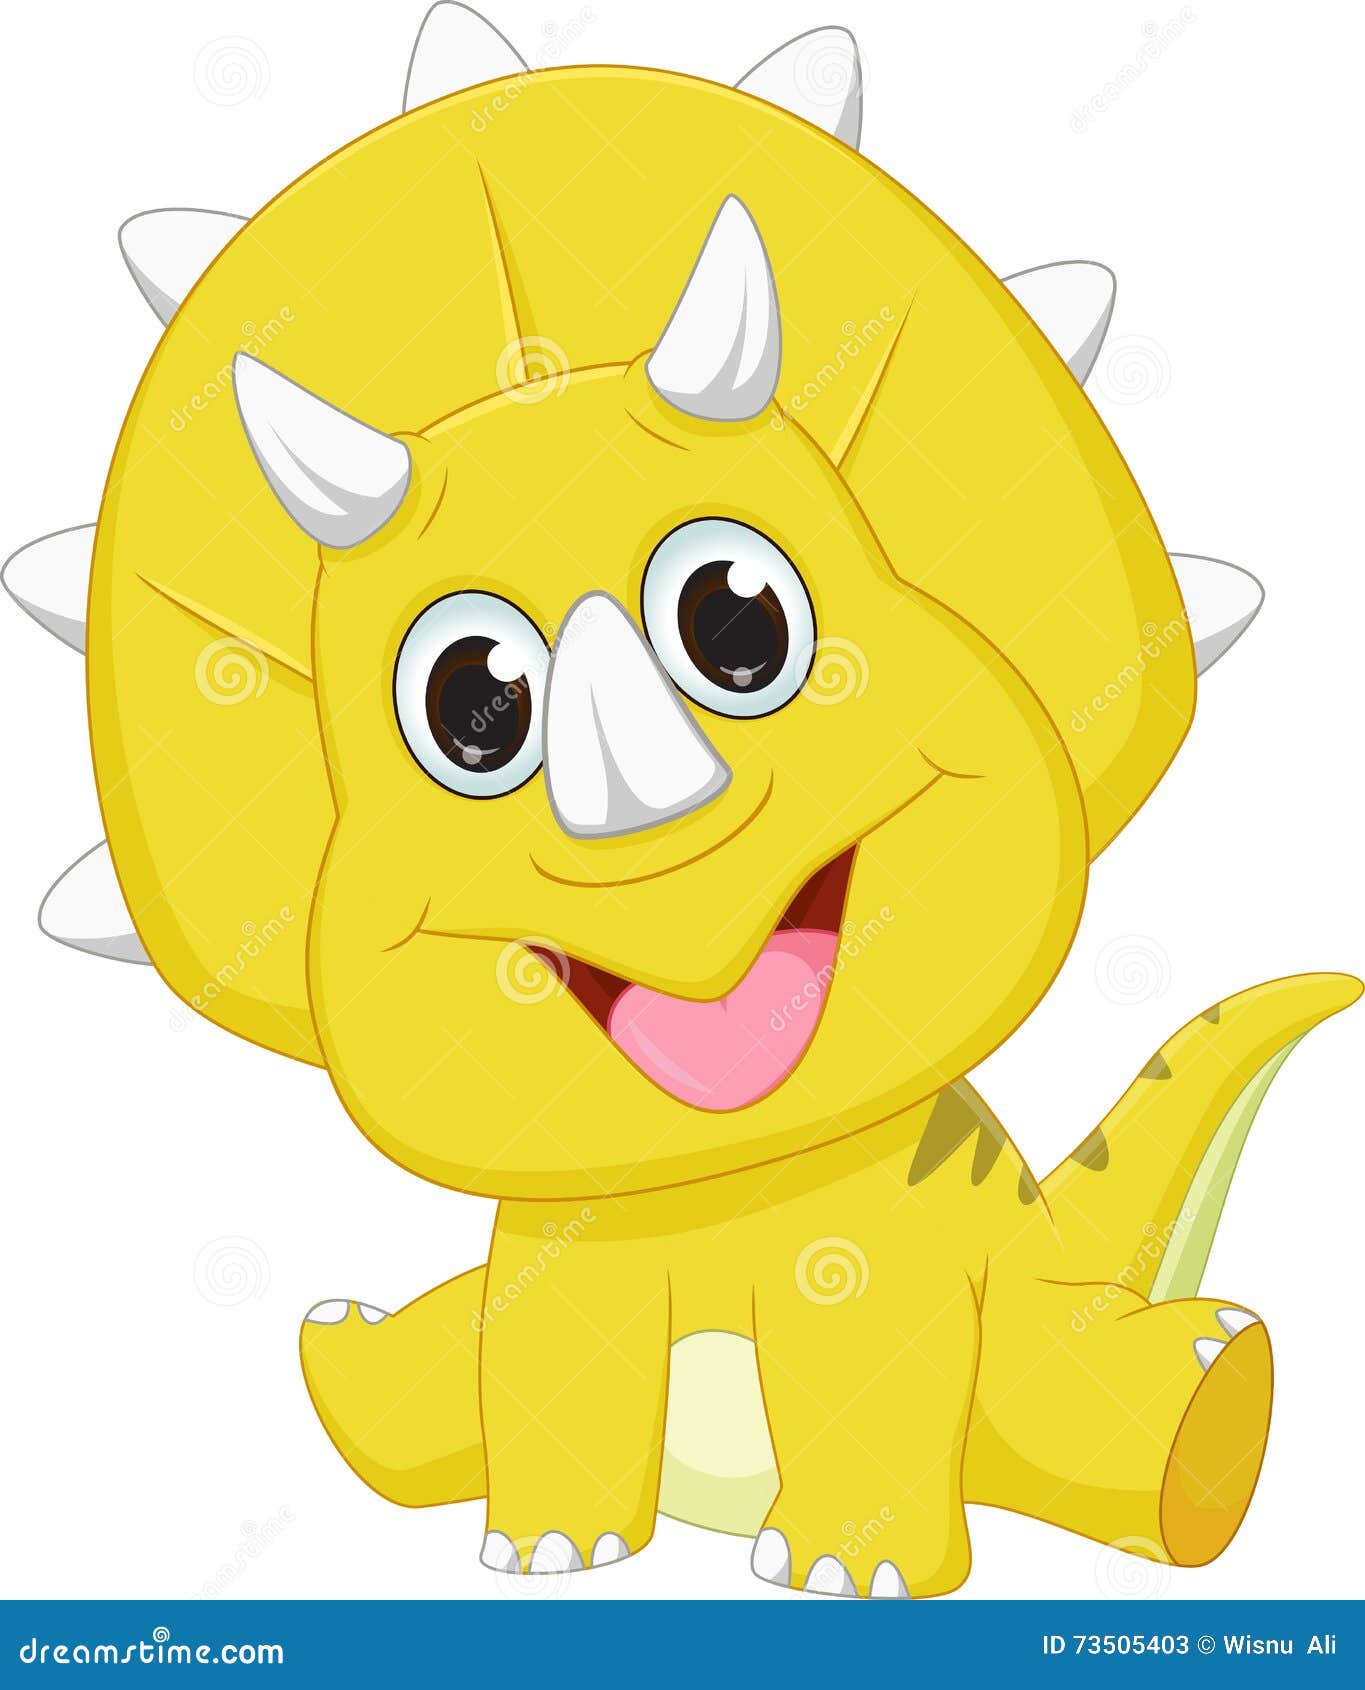 Cute triceratops cartoon stock vector. Illustration of character - 73505403